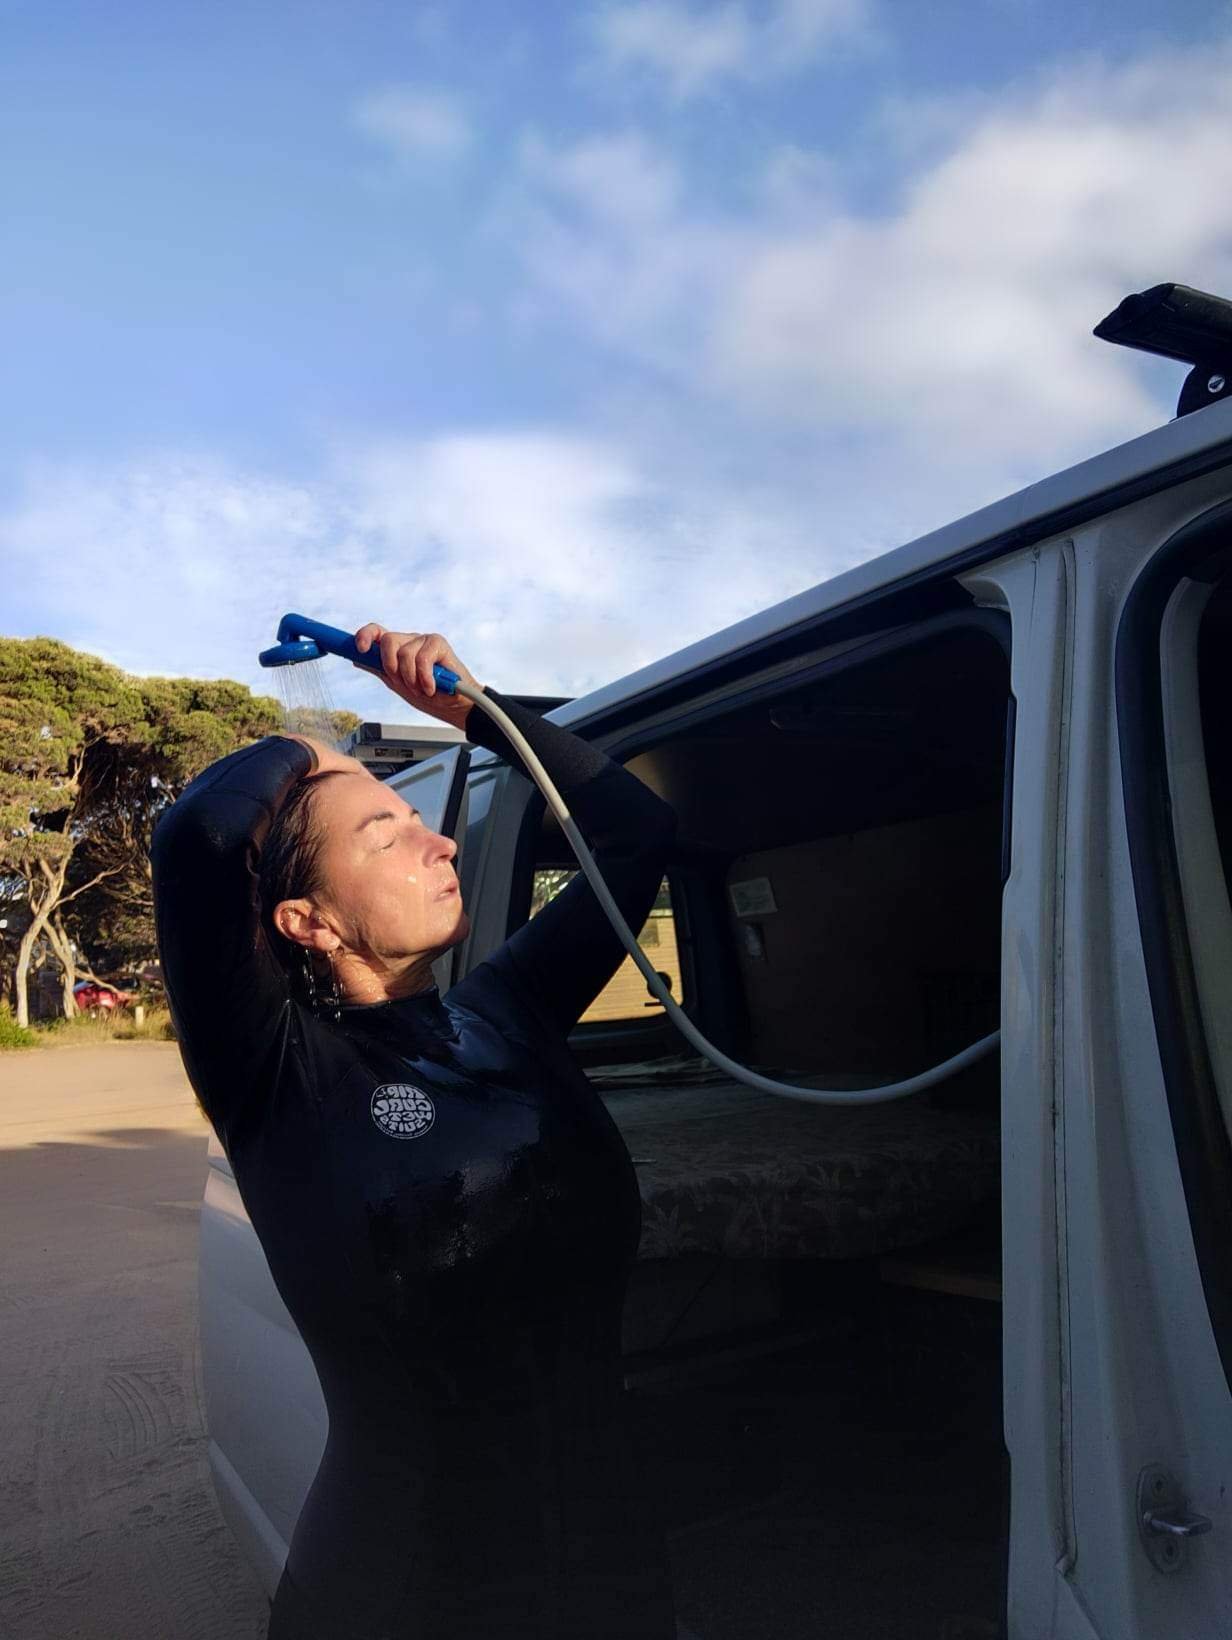 Riverflows gives us good tips on how to setup a good hot shower on you van, especially for whoever lives on cold areas.